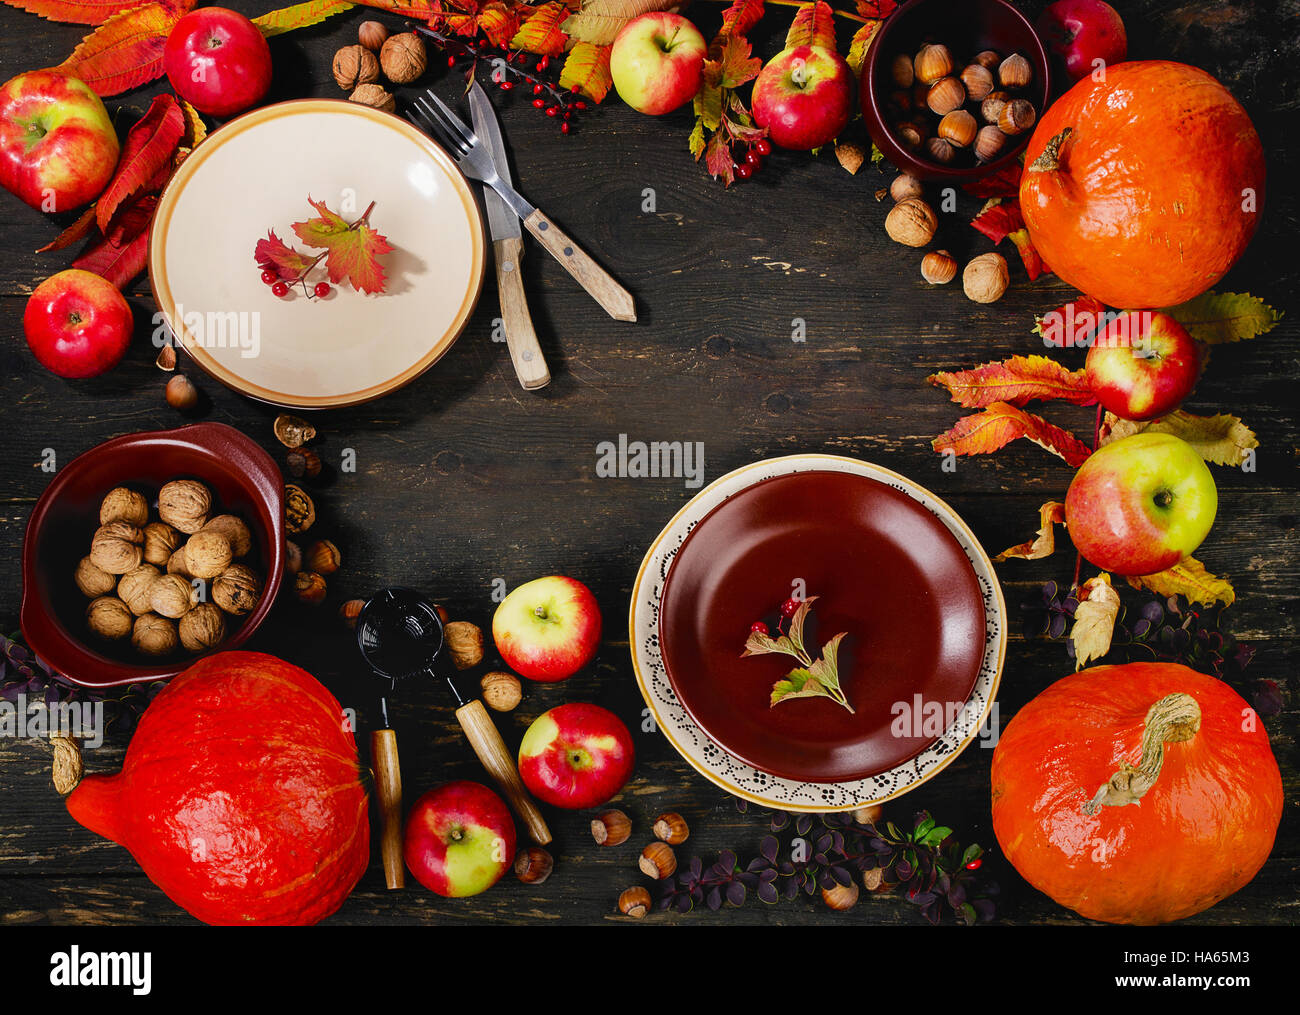 Autumn table setting with pumpkins and apples. Flat lay Stock Photo